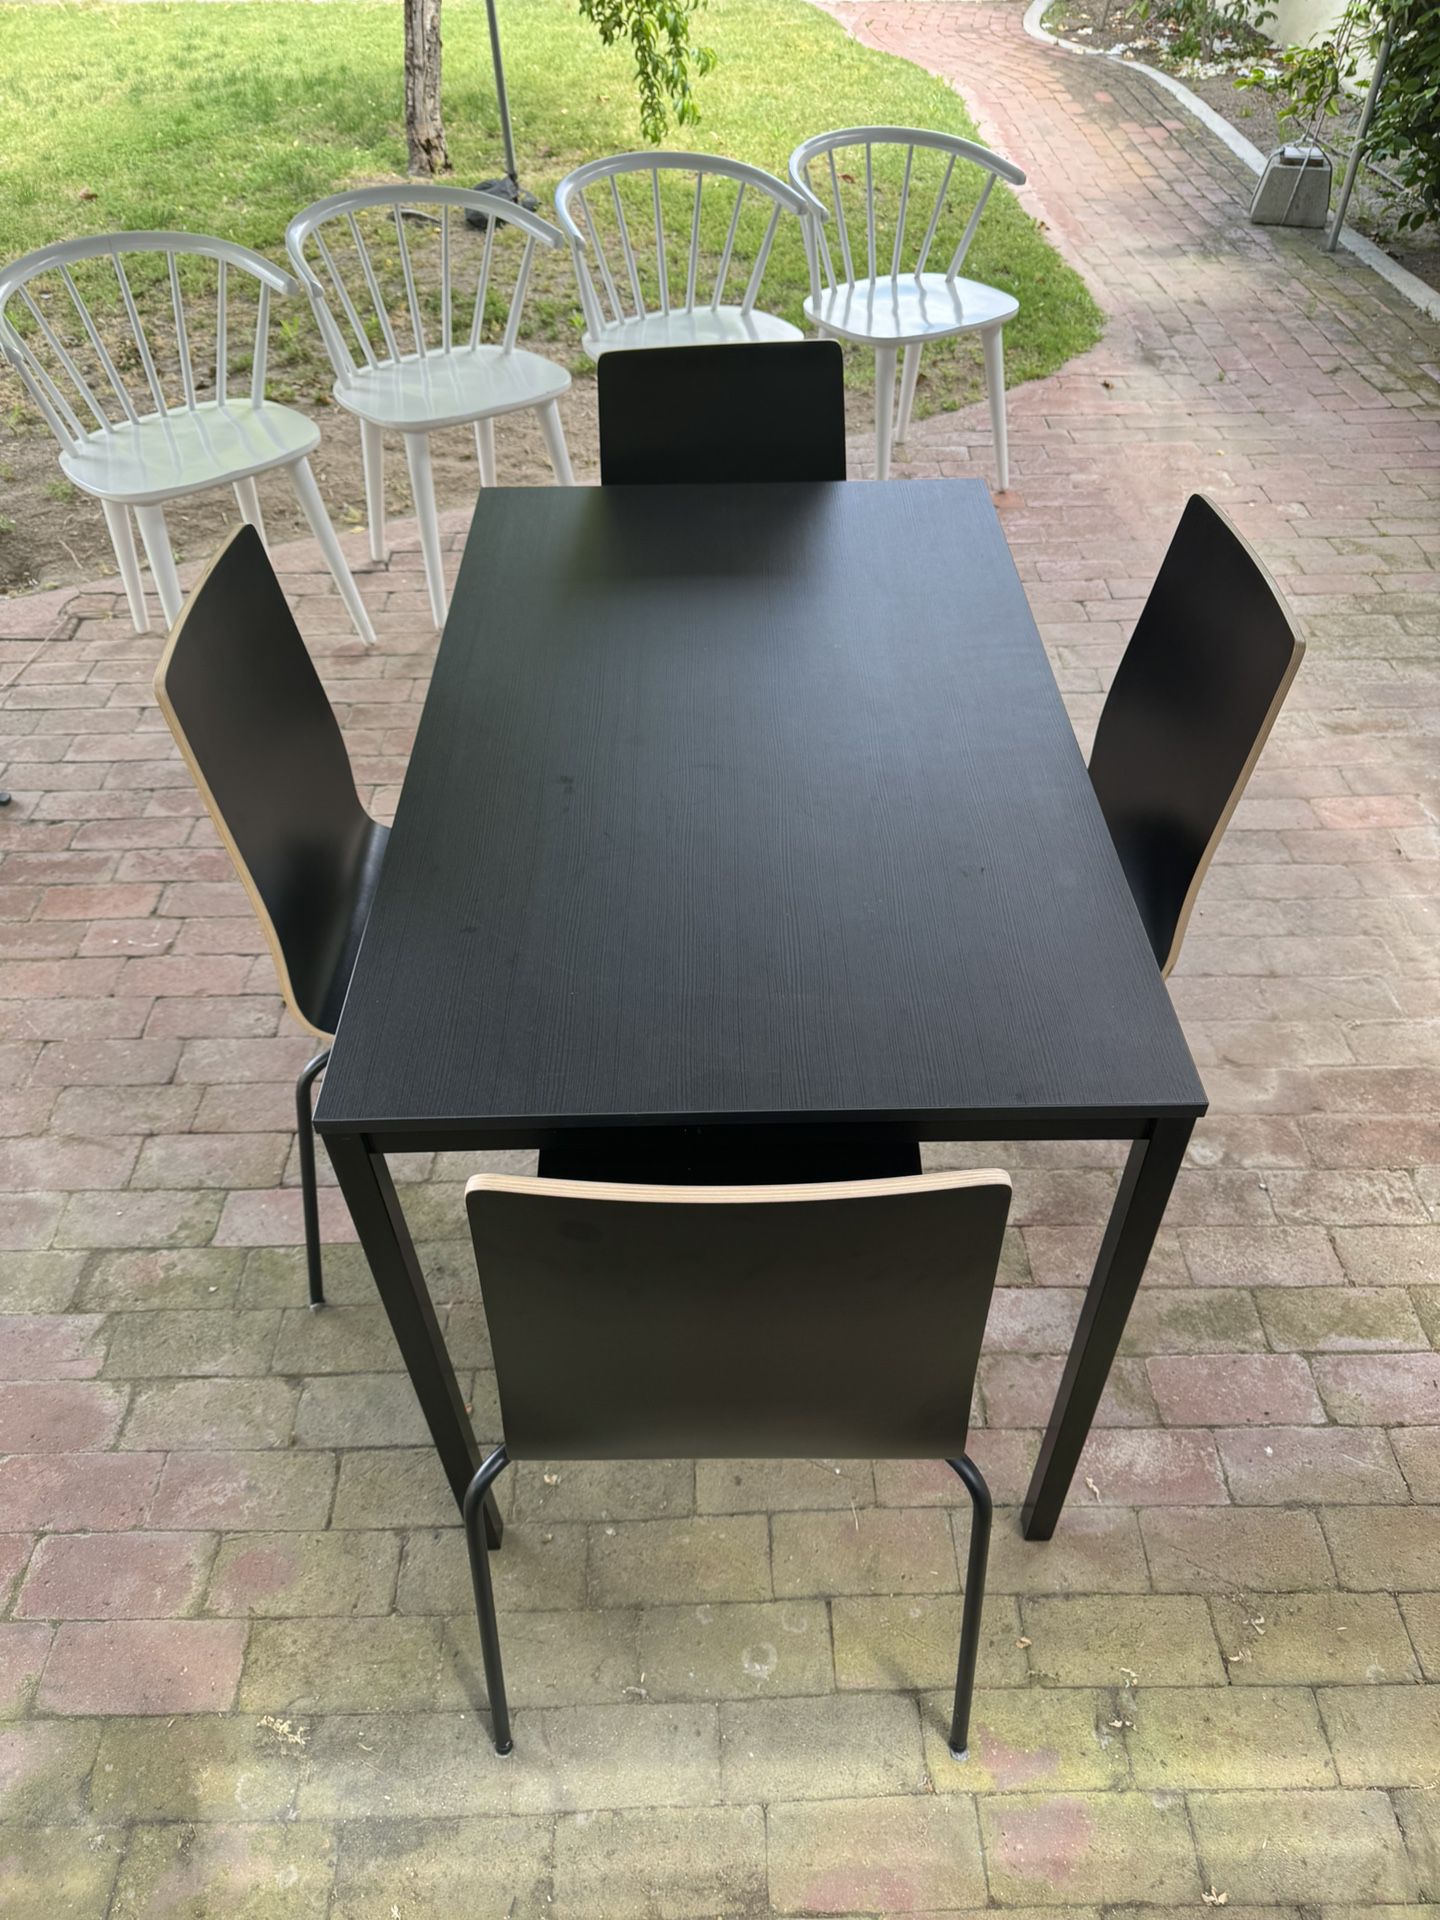 SMALL APARTMENT SIZE DINING TABLE WITH CHAIRS 